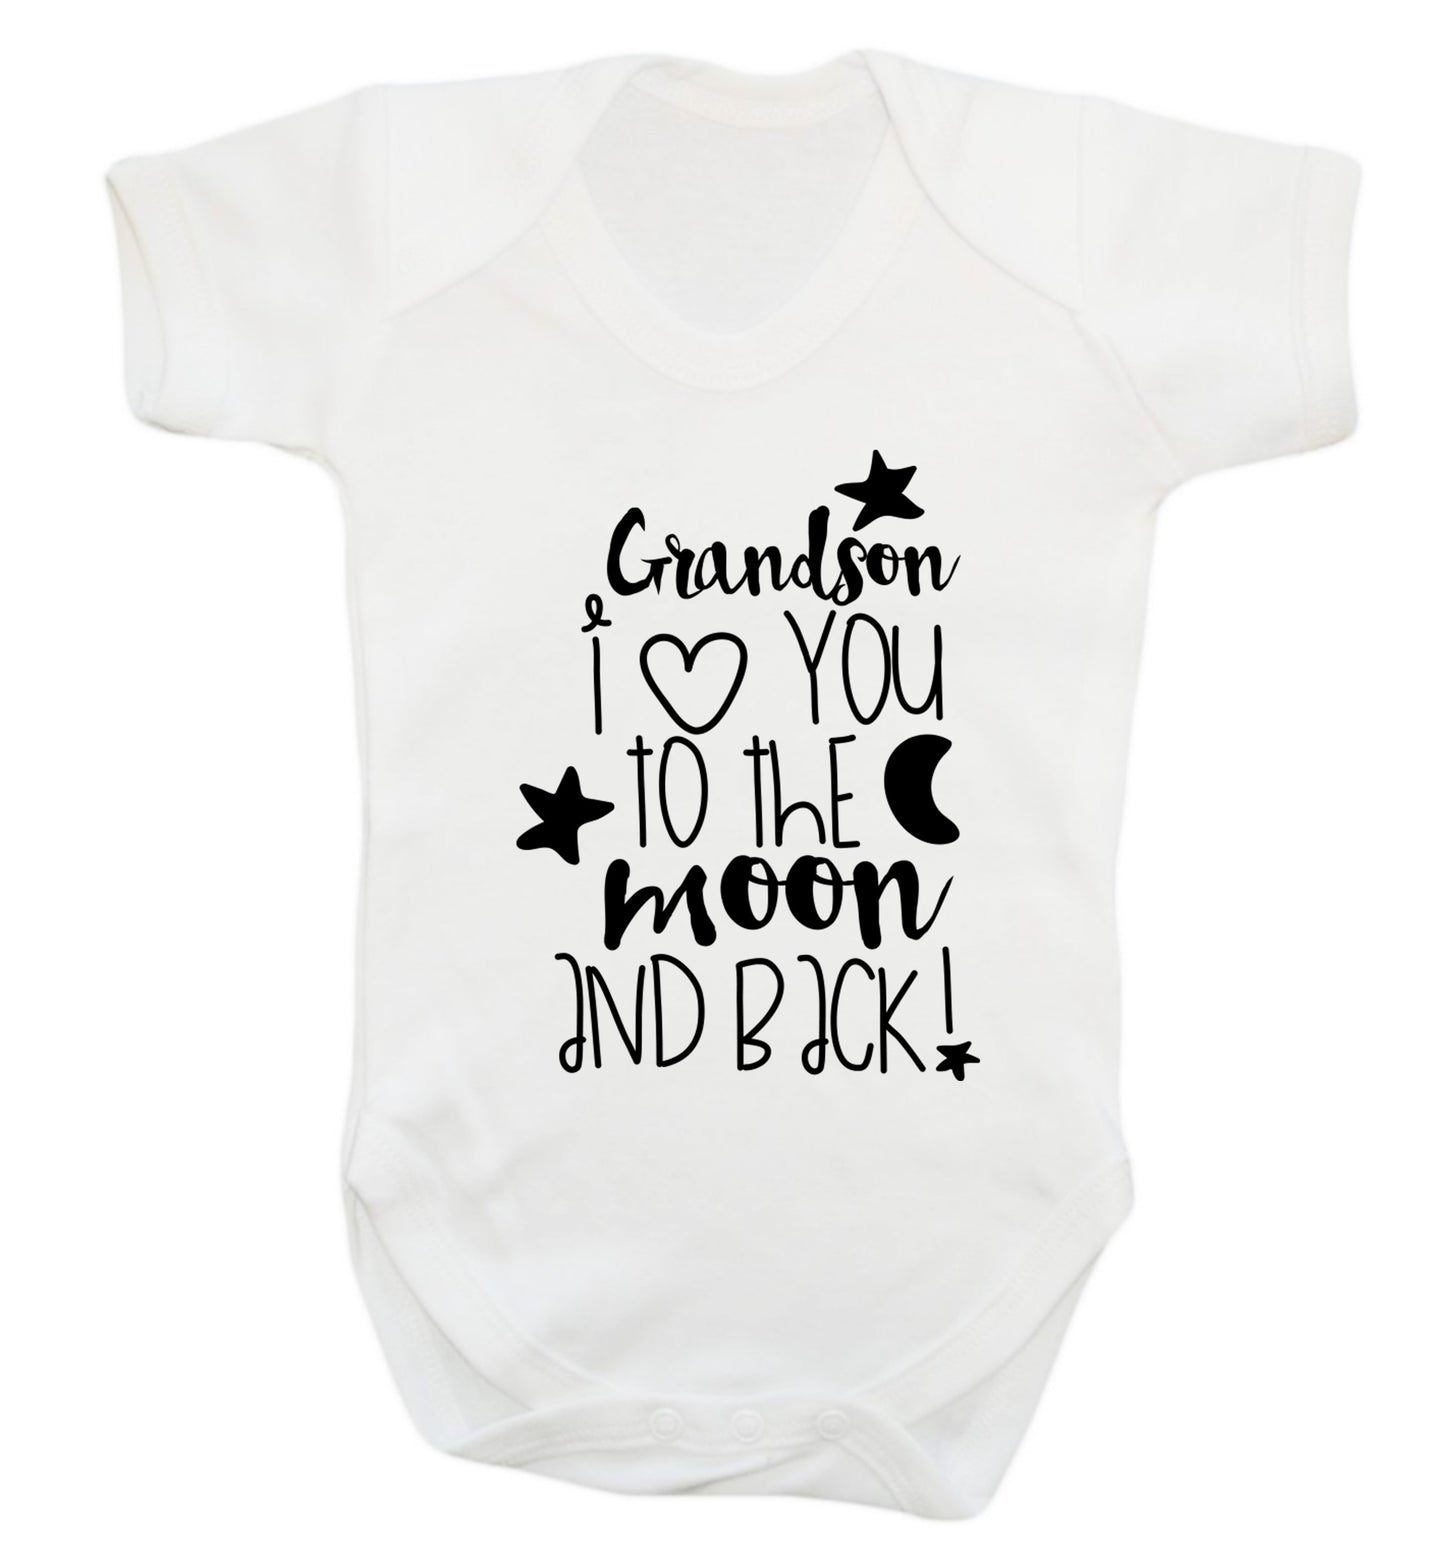 Grandson I love you to the moon and back Baby Vest white 18-24 months